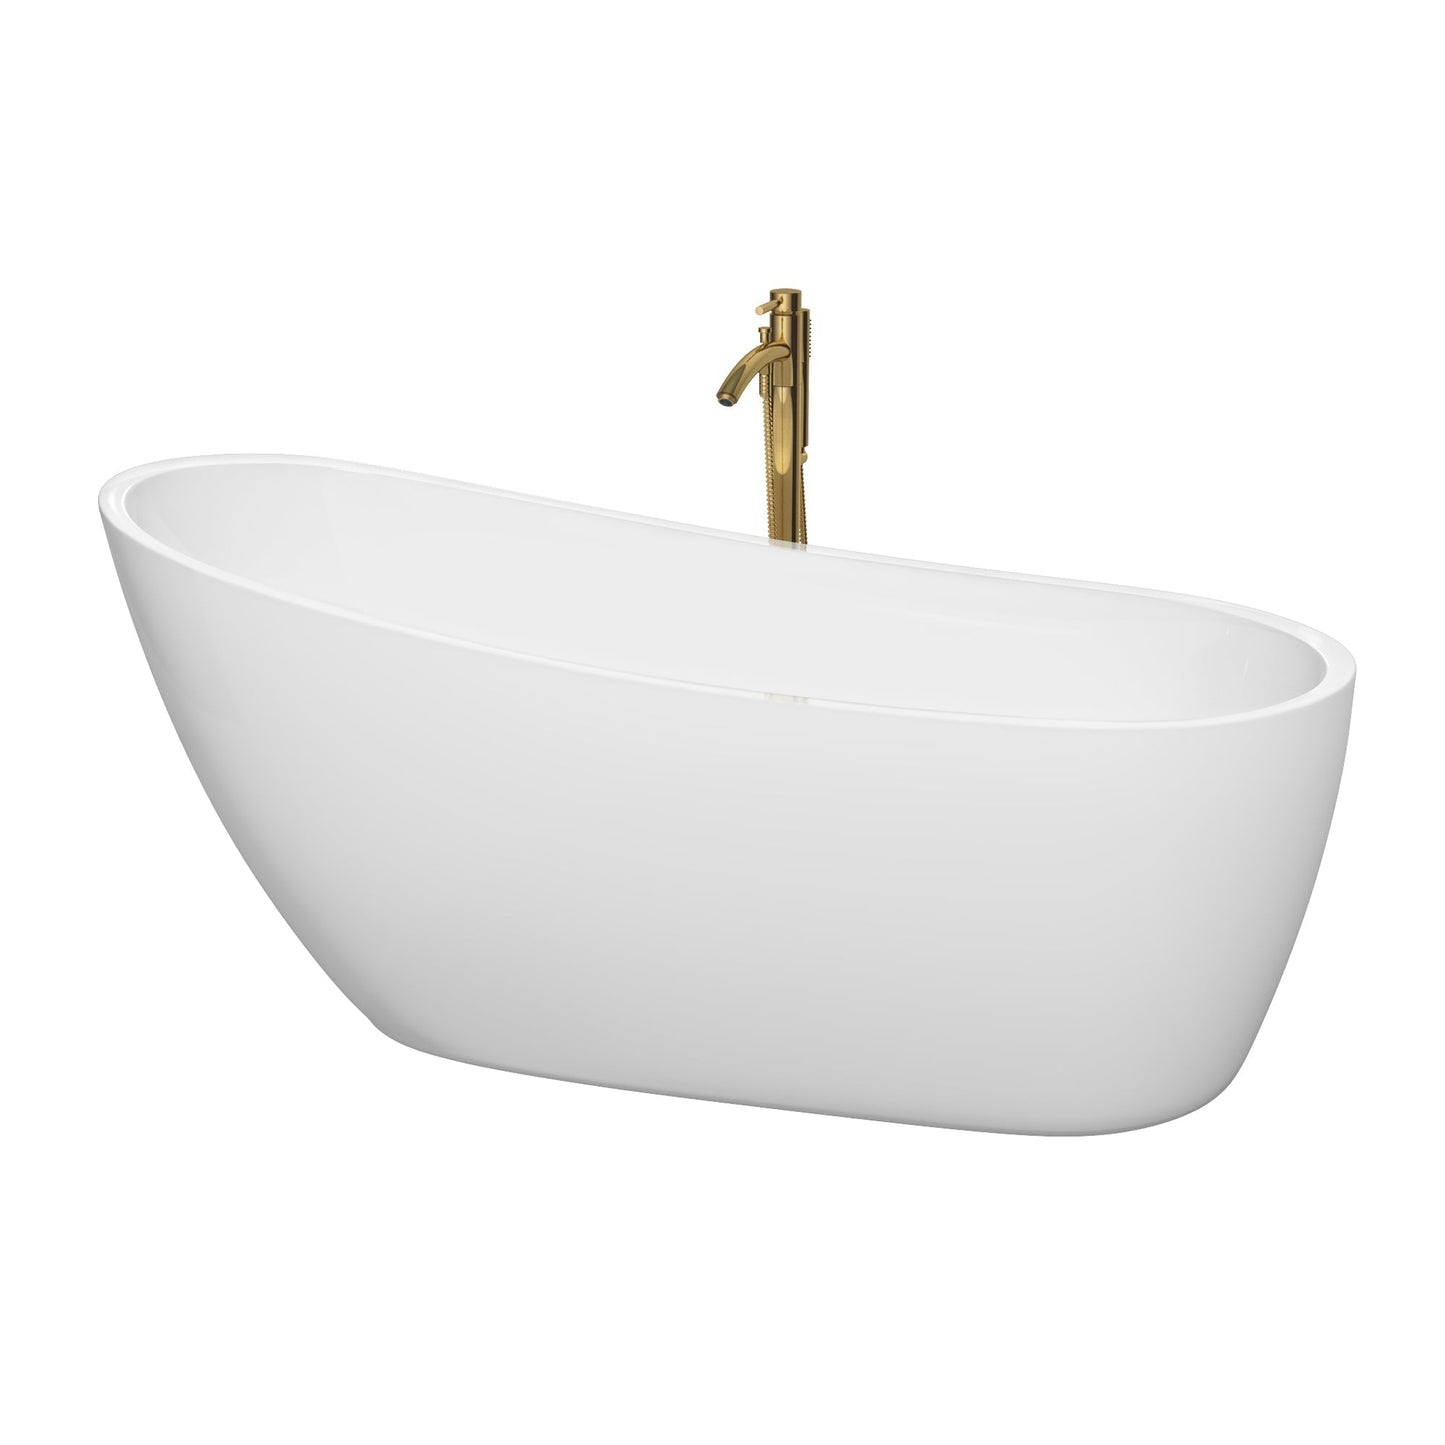 Wyndham Collection Florence 68" Freestanding Bathtub in White With Shiny White Trim and Floor Mounted Faucet in Brushed Gold